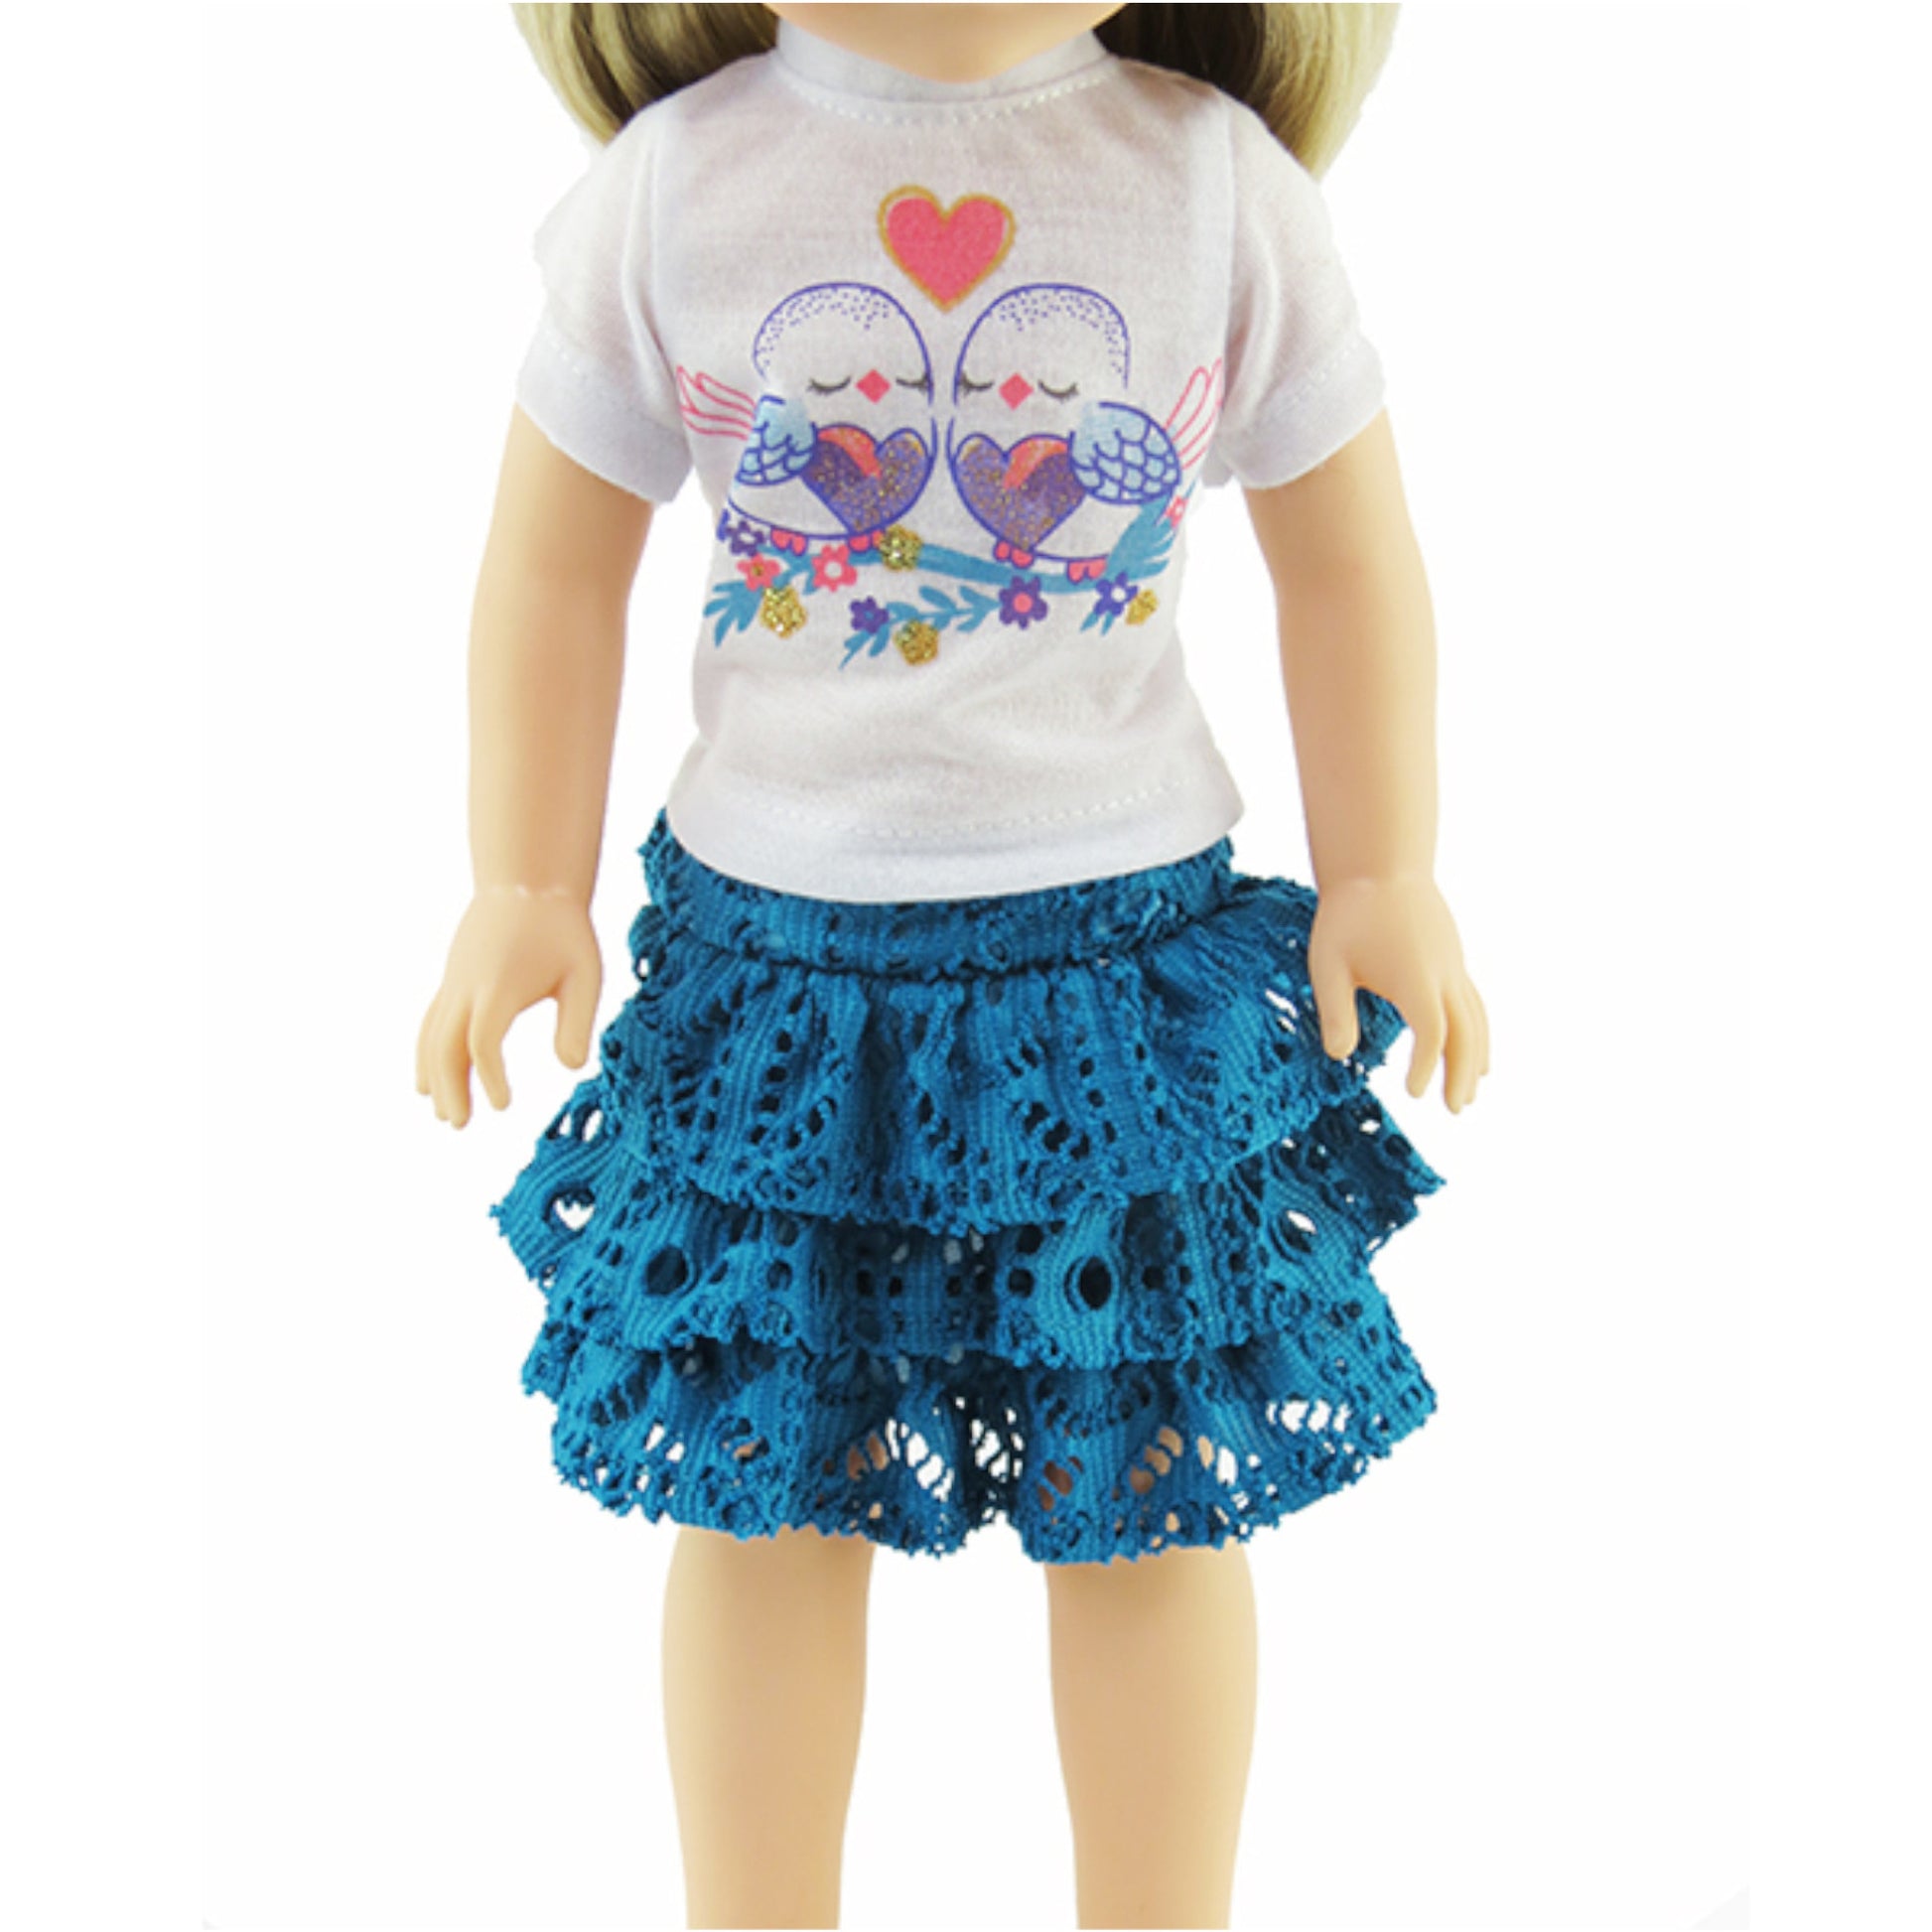 Teal Love Birds Skirt Set for 14 1/2-inch dolls with doll Up Close